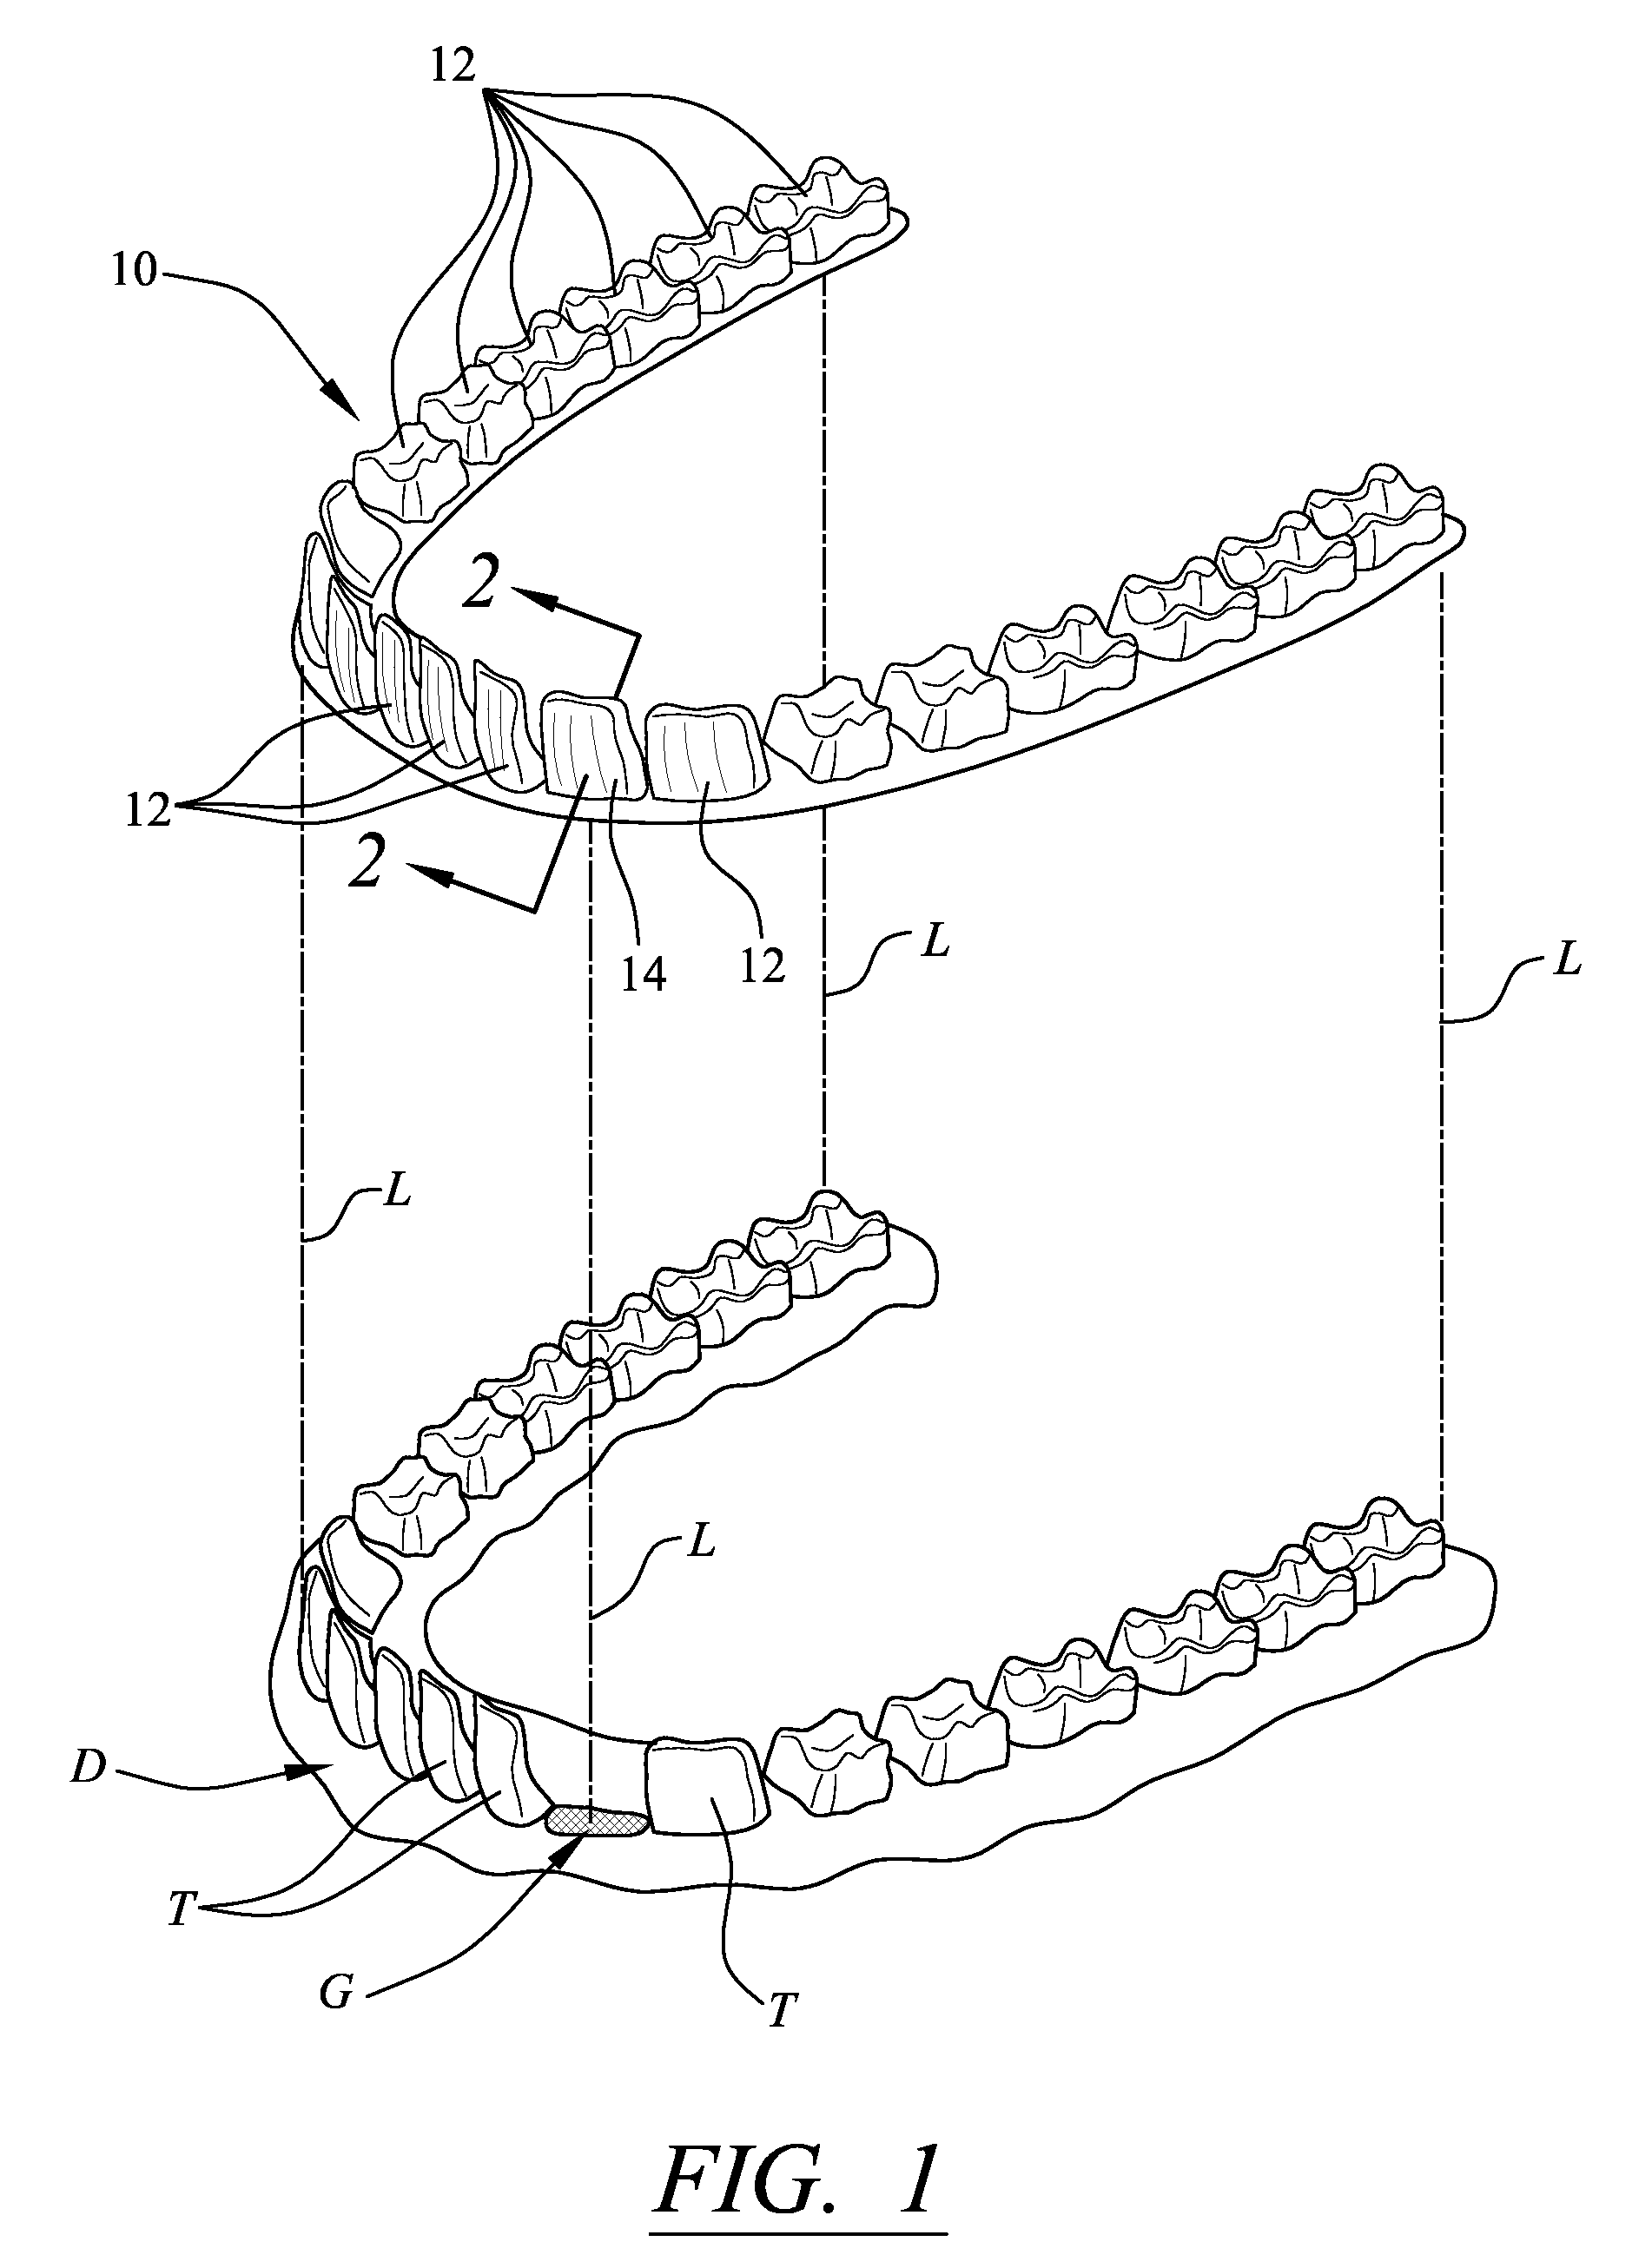 Enhancement to dental alignment device